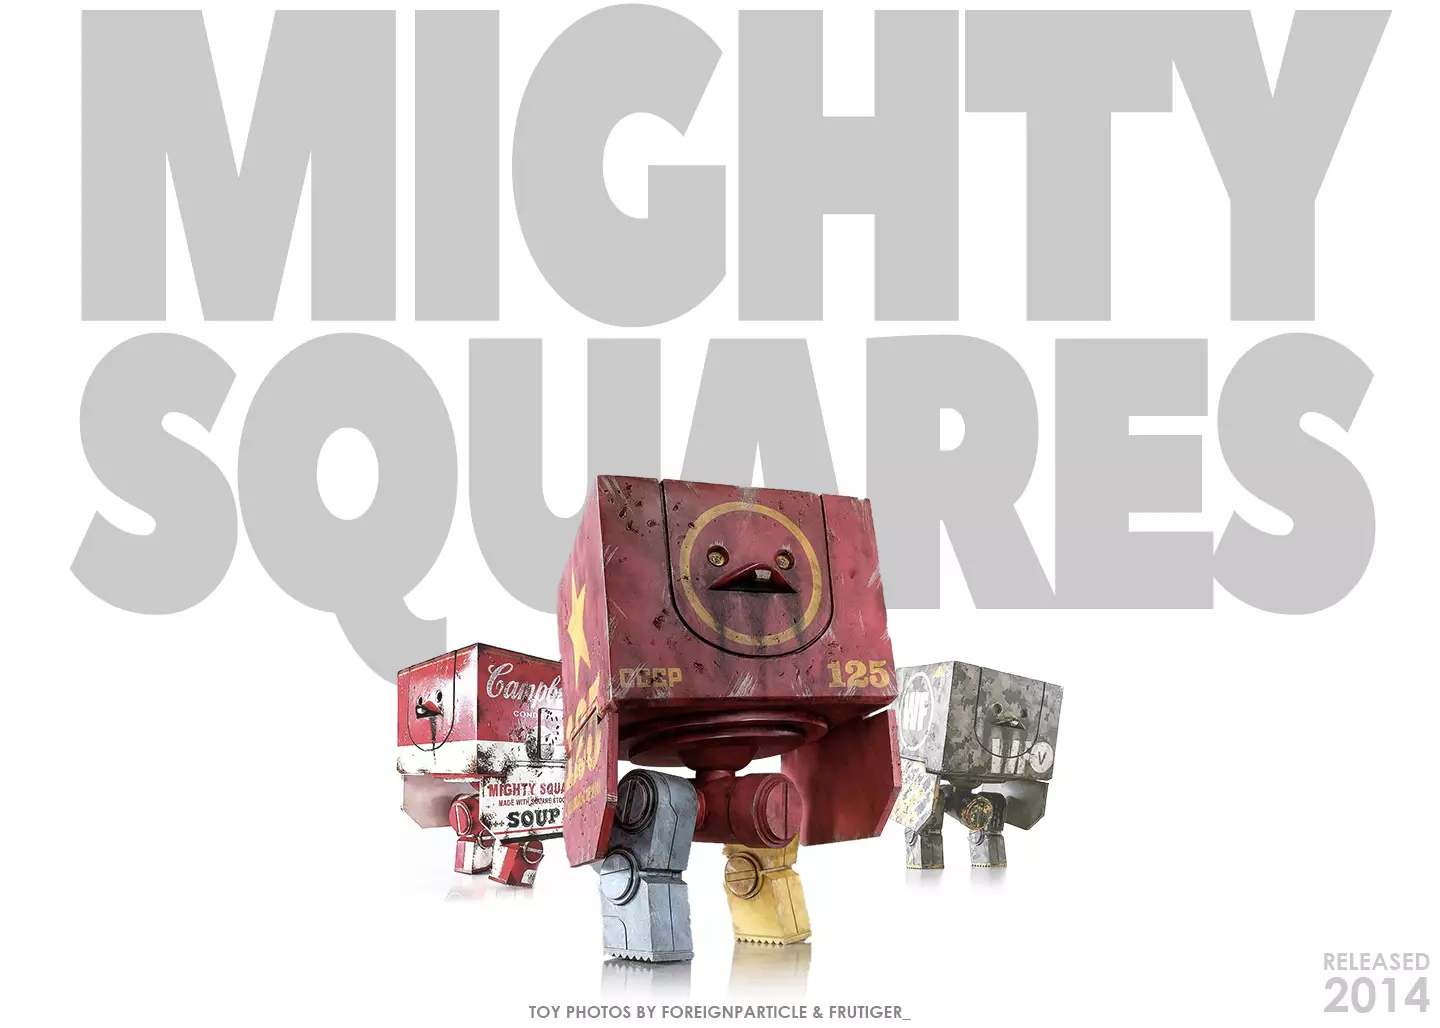 Mighty Squares by ThreeA, released 2014